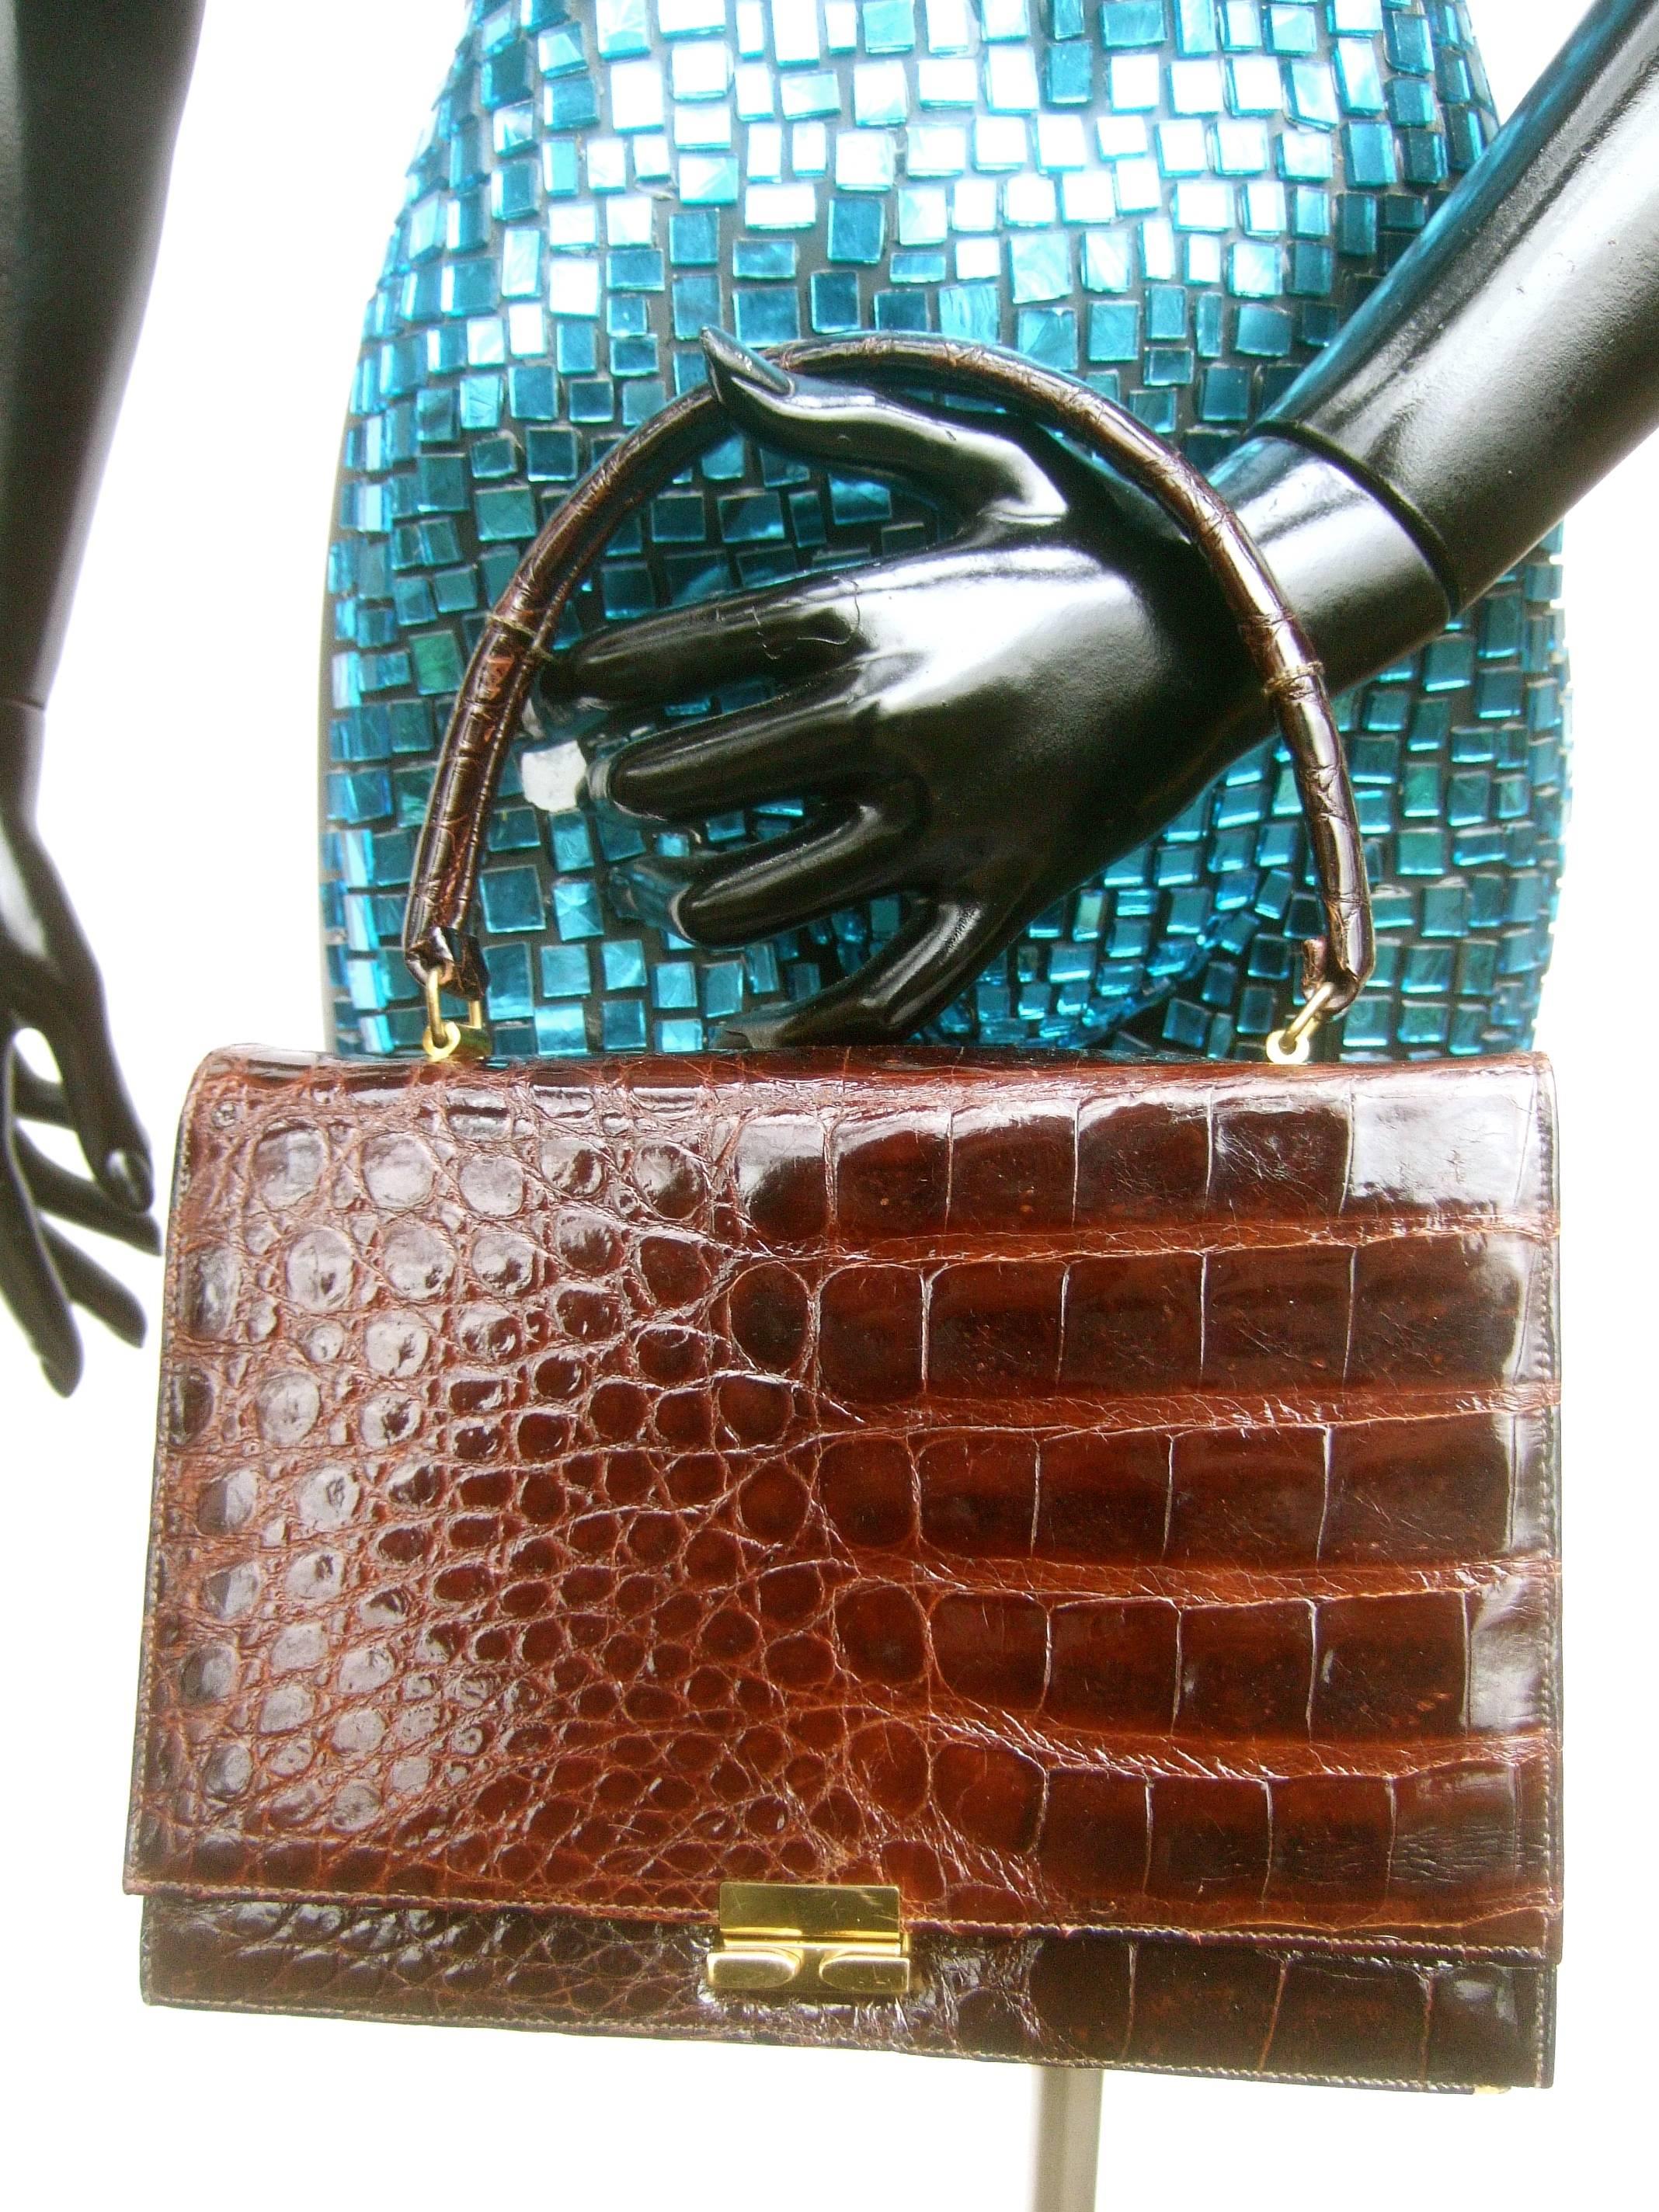 Luxurious brown glazed genuine alligator handbag c 1960s 
The elegant midcentury handbag is covered 
with glossy mahogany brown alligator skin 

The clasp mechanism is sleek brass tone metal 
The interior is lined in light tan leather designed 
with